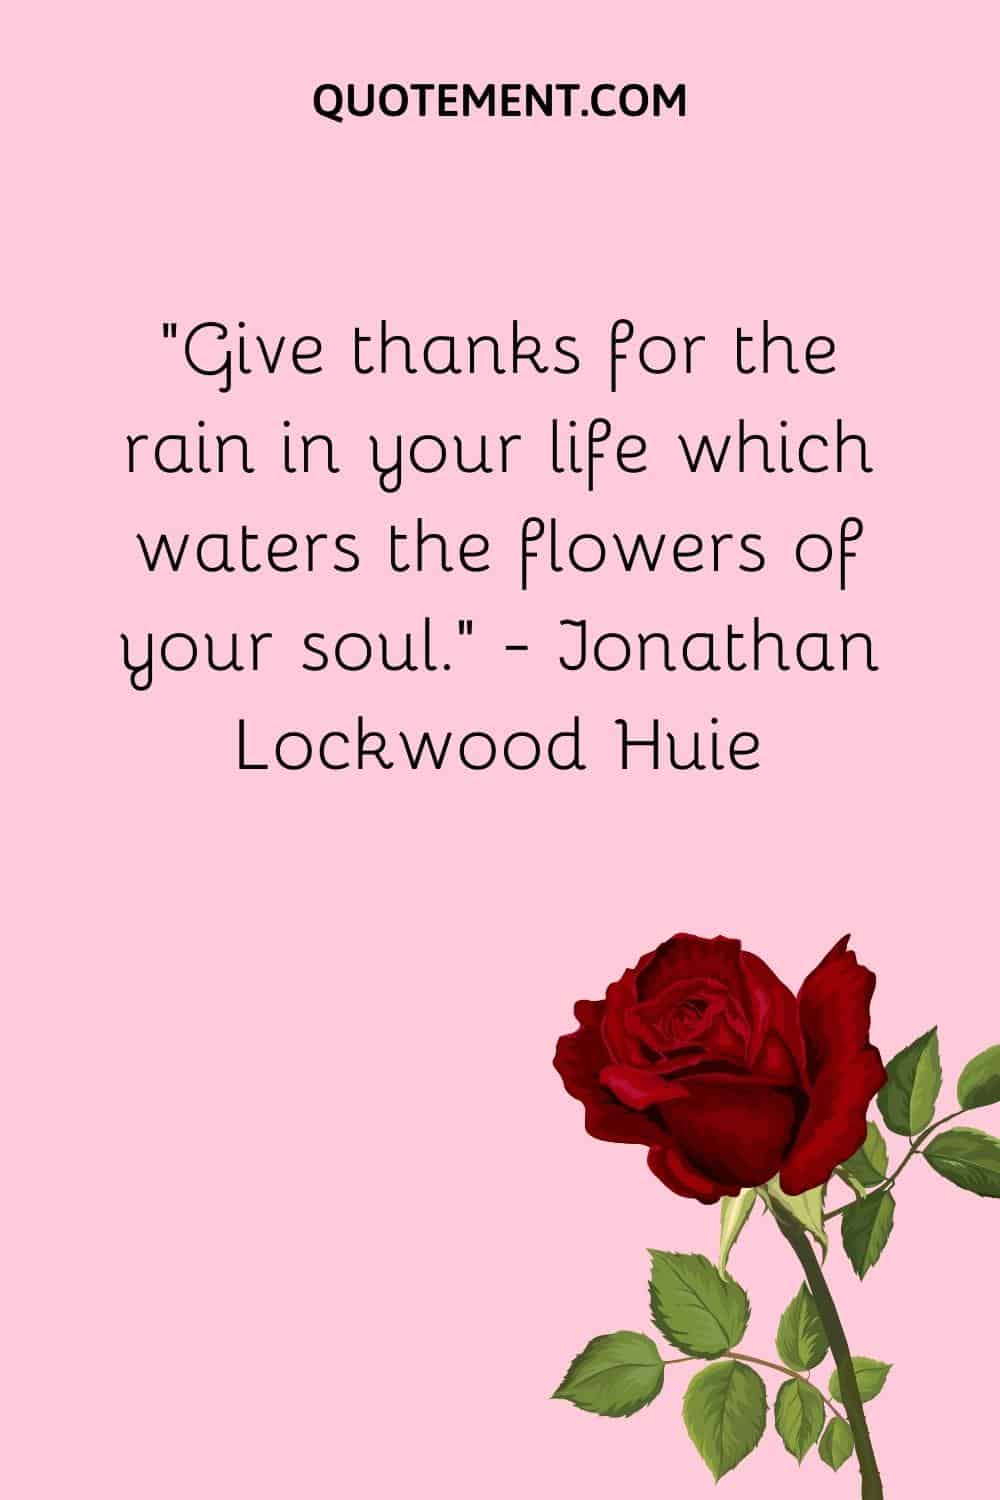 “Give thanks for the rain in your life which waters the flowers of your soul.” — Jonathan Lockwood Huie